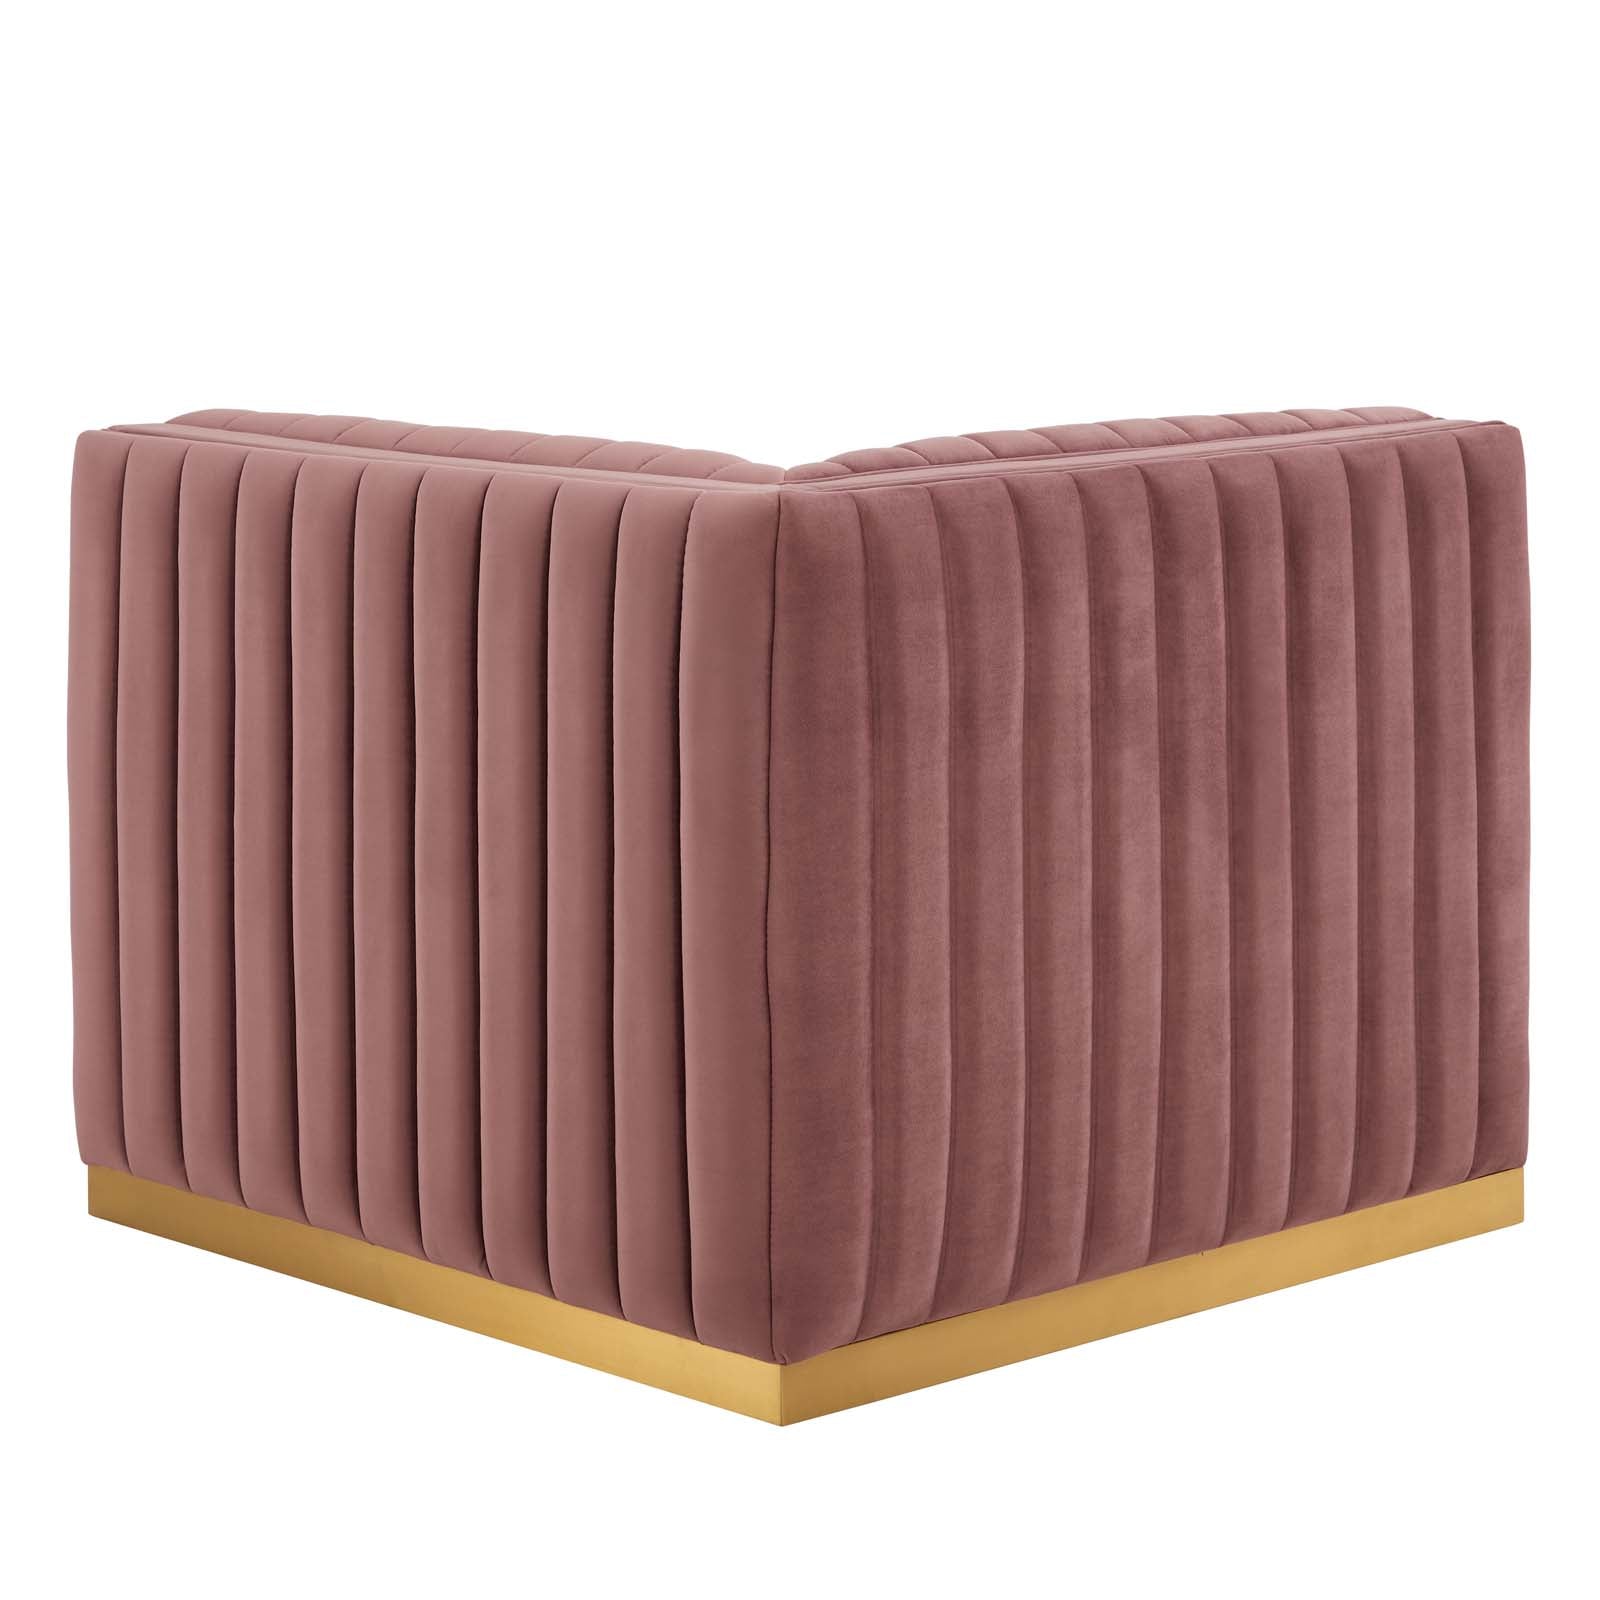 Modway Accent Chairs - Conjure Channel Tufted Performance Velvet Right Corner Chair Gold Dusty Rose